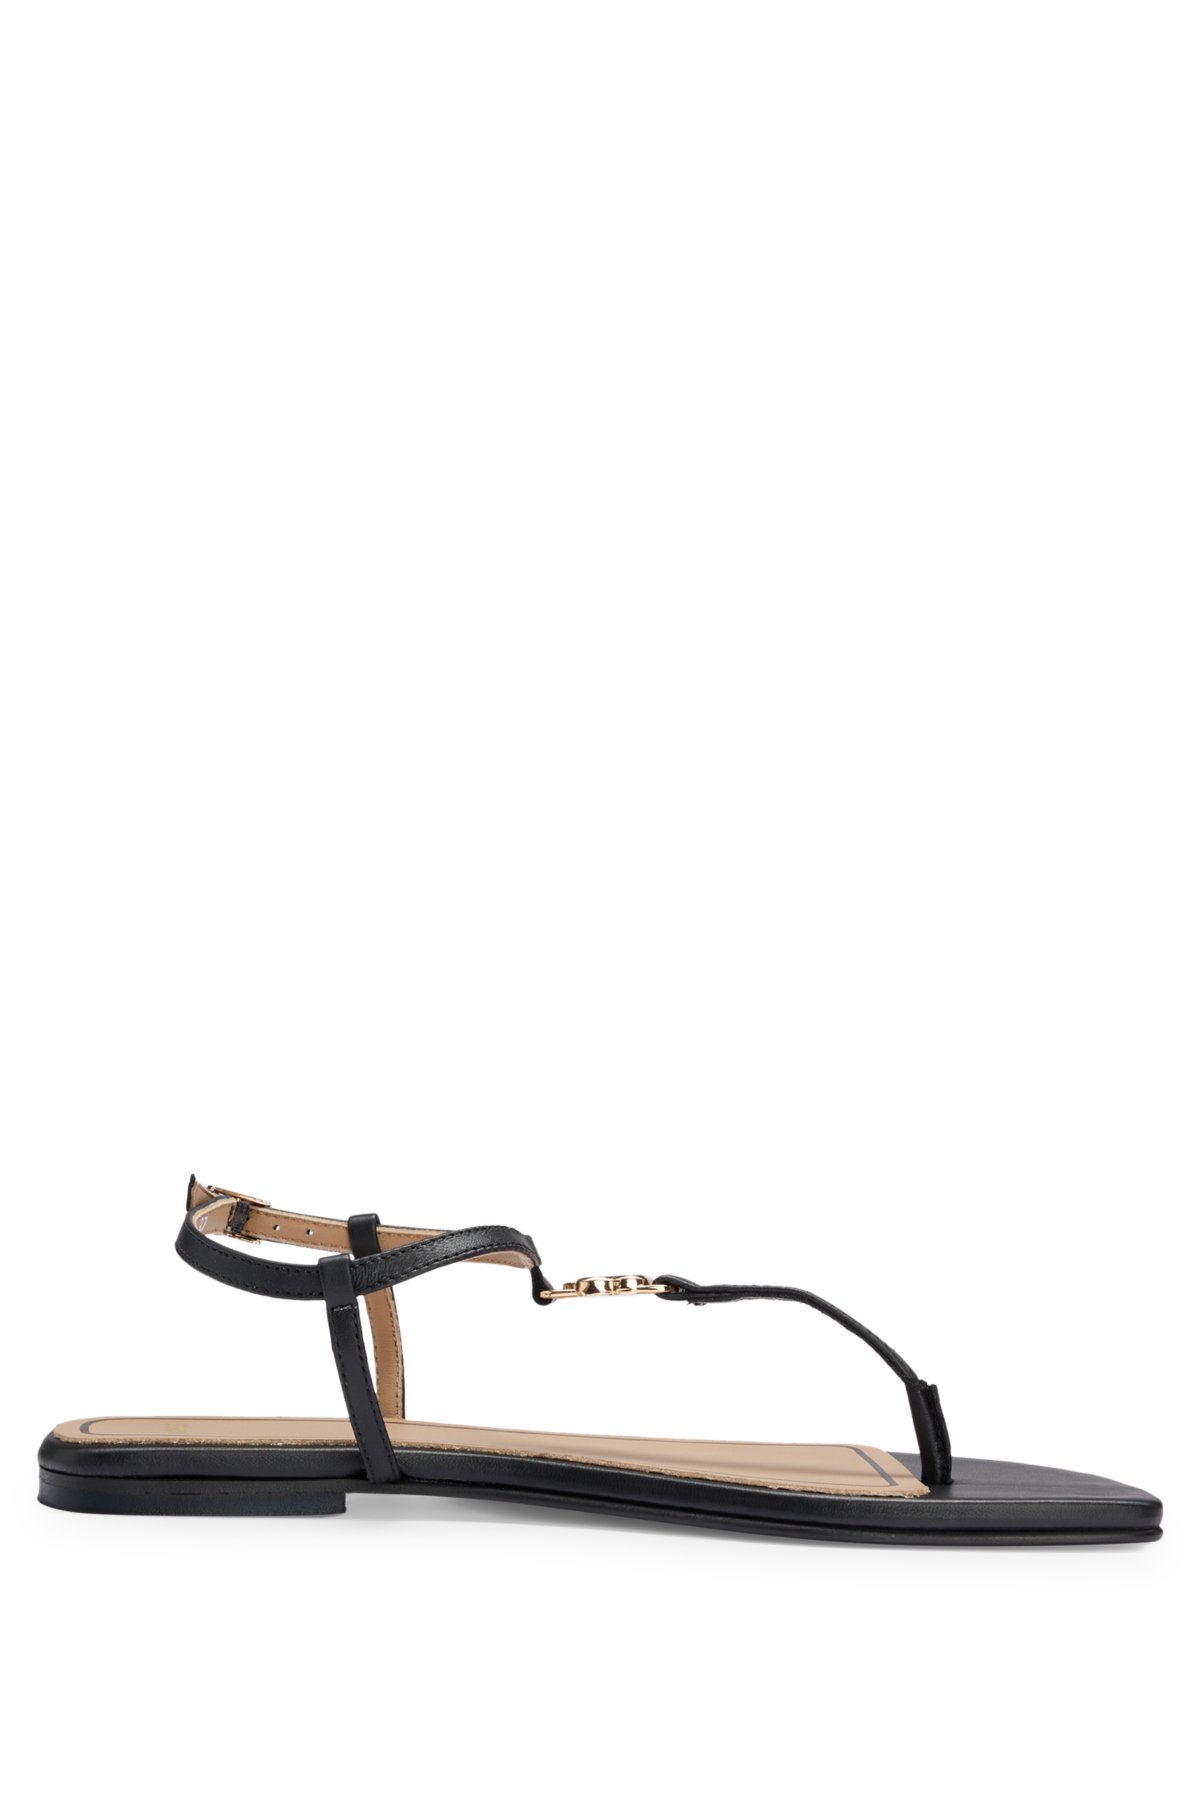 Leather sandals with toe-post detail, Black